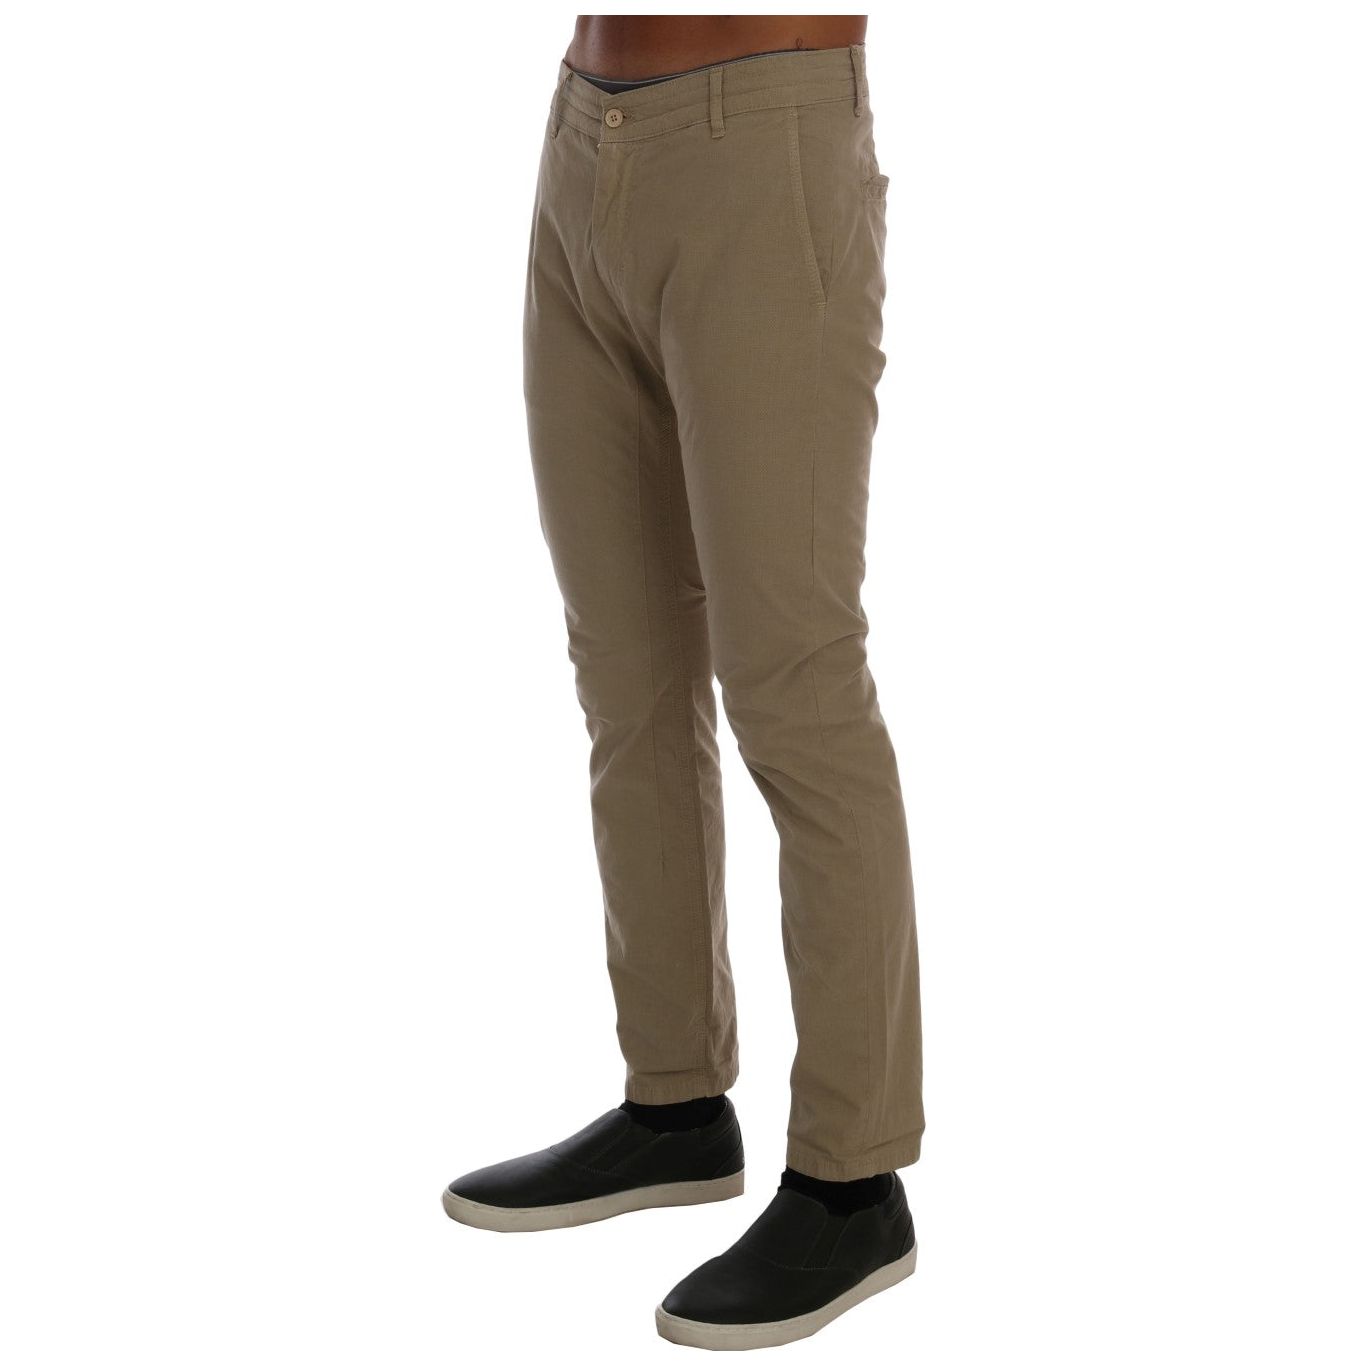 Daniele Alessandrini Beige Slim Fit Chinos for Sophisticated Style Jeans & Pants beige-cotton-stretch-slim-fit-chinos 457192-beige-cotton-stretch-slim-fit-chinos-1.jpg